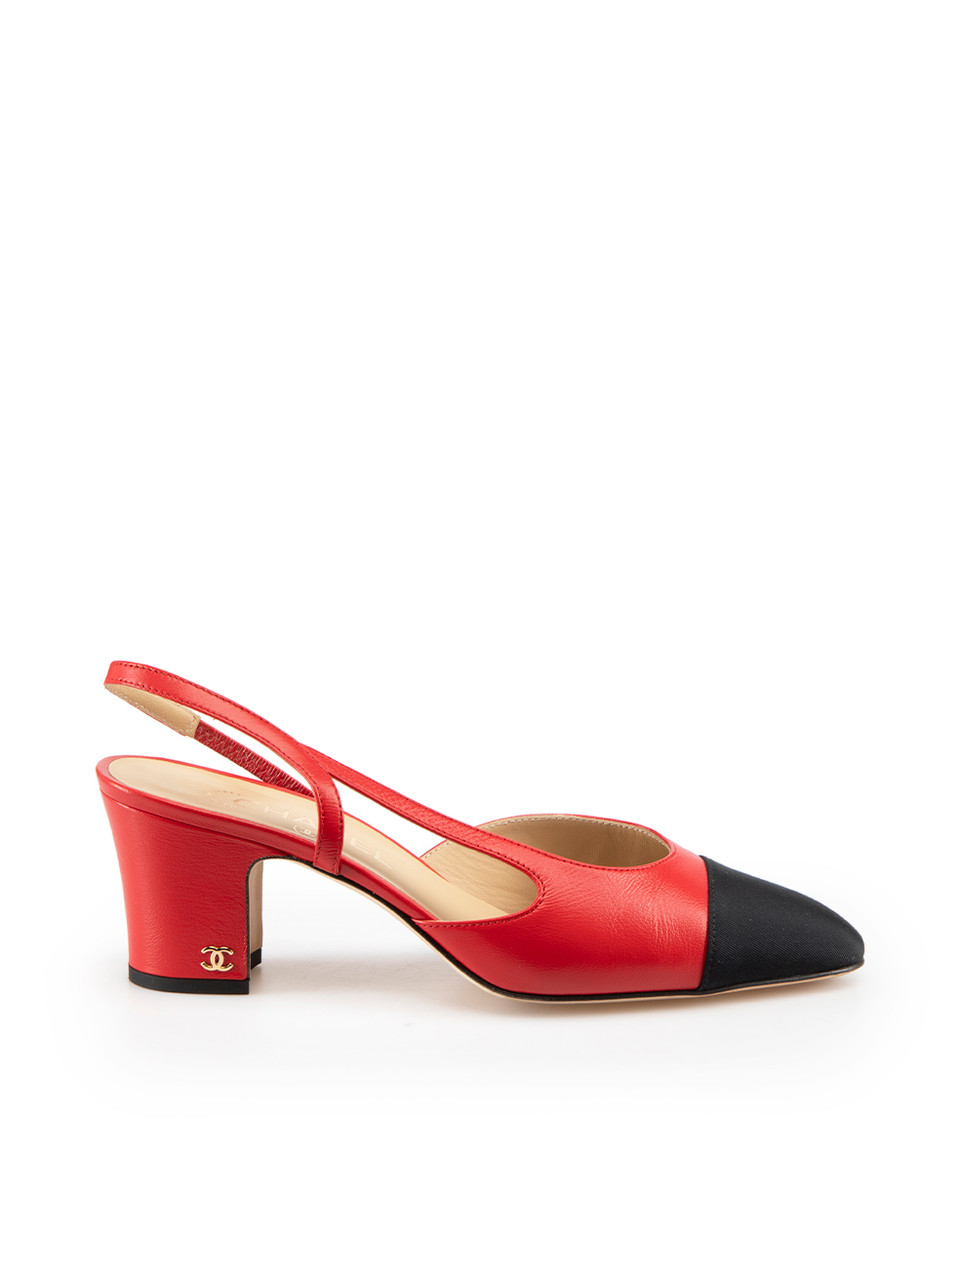 Used Chanel Red Leather Cap-Toe Slingback Heels